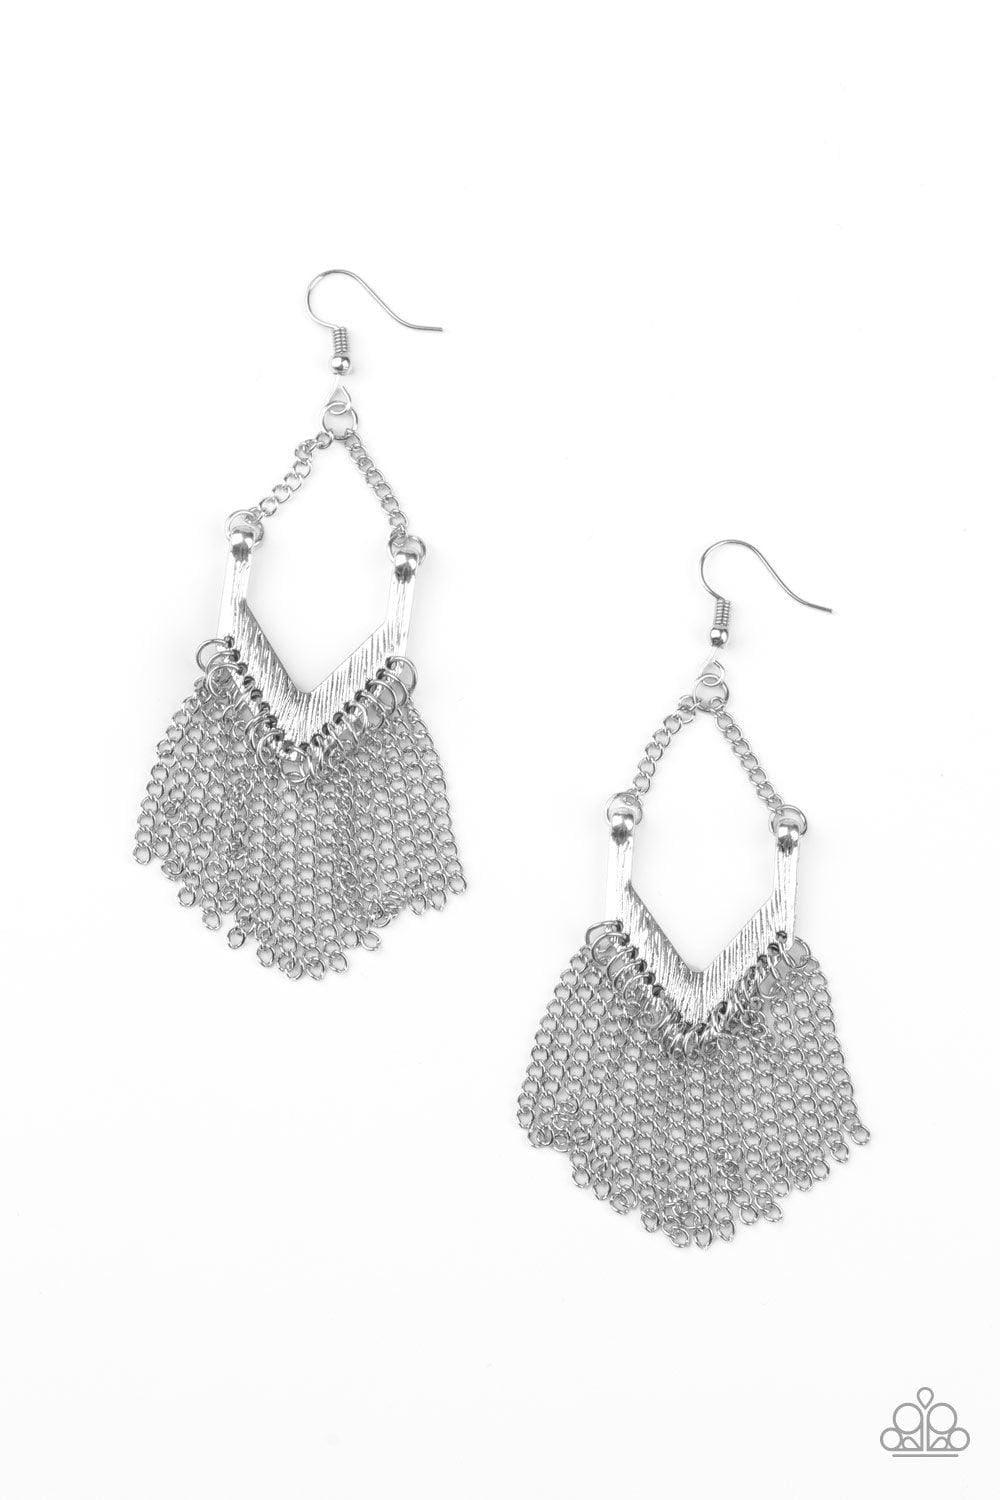 Paparazzi Accessories - Unchained Fashion - Silver Earrings - Bling by JessieK